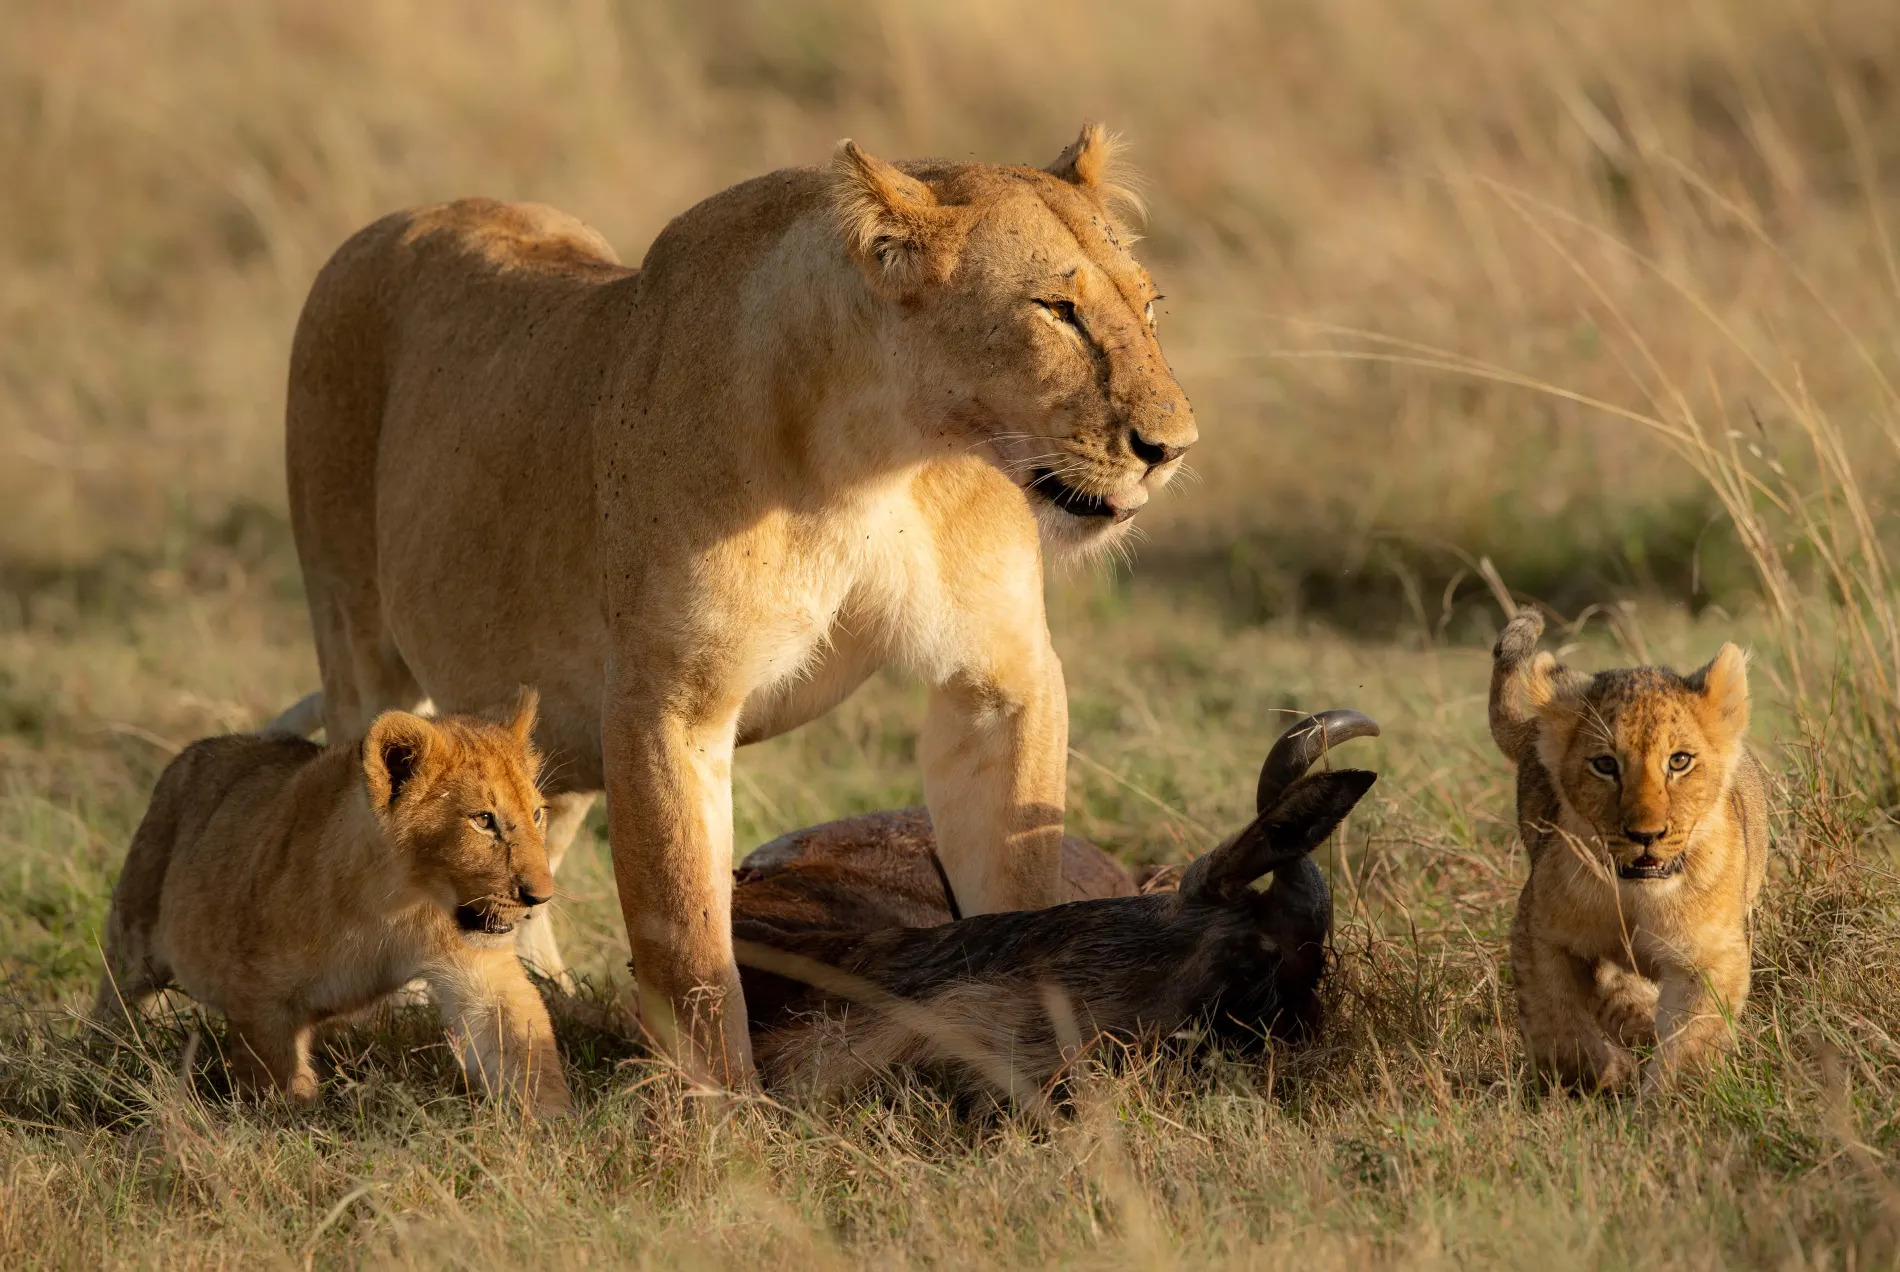 Cub Marsh pride female with cubs